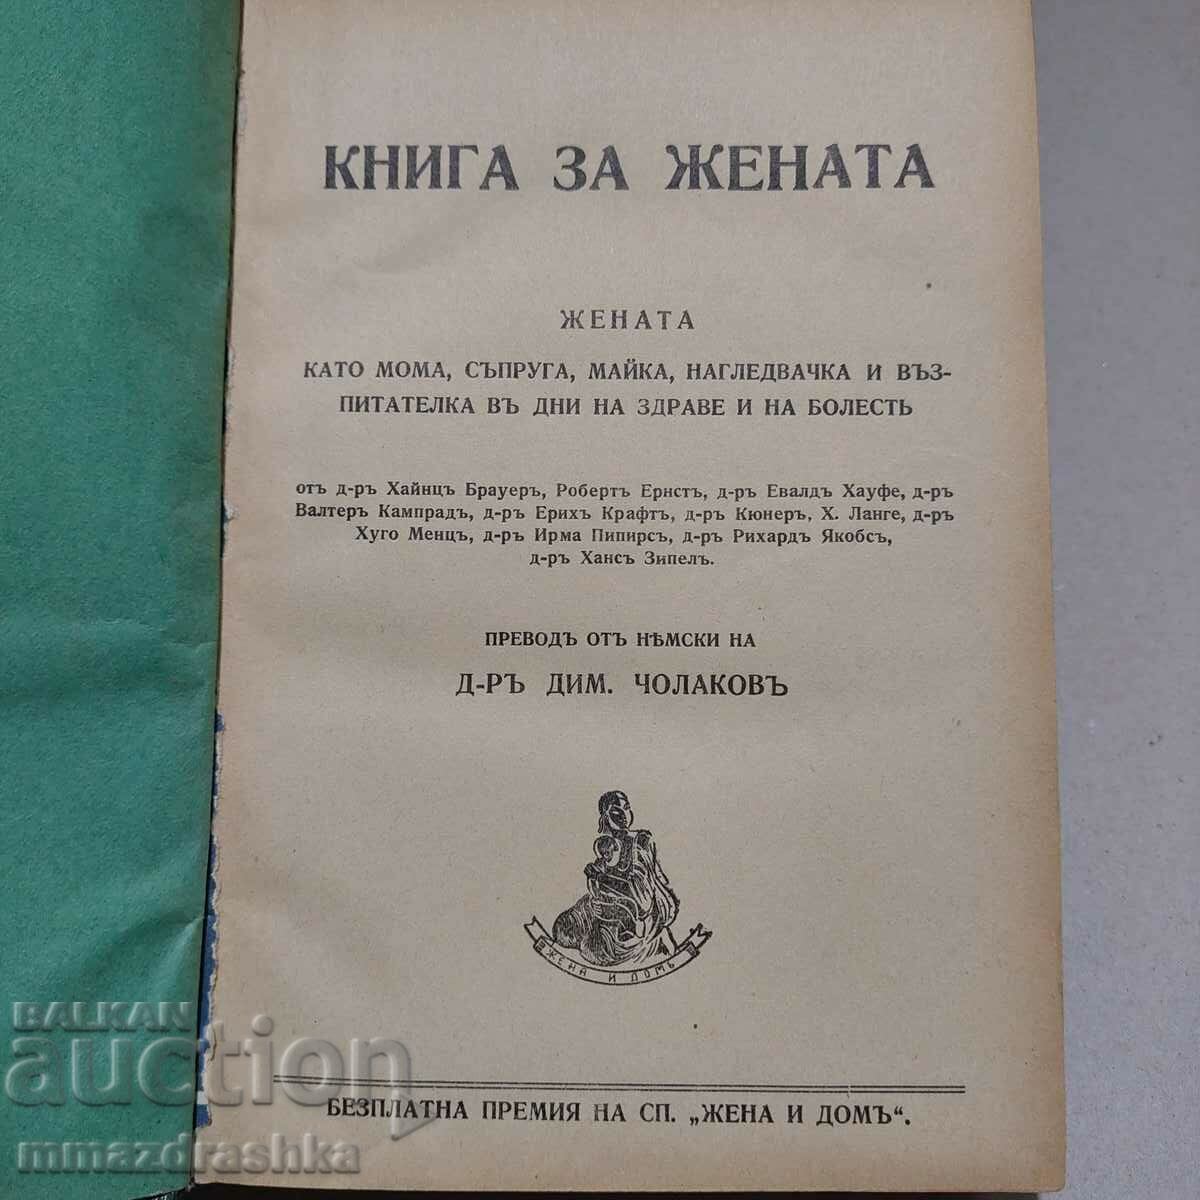 A book about women, before 1944